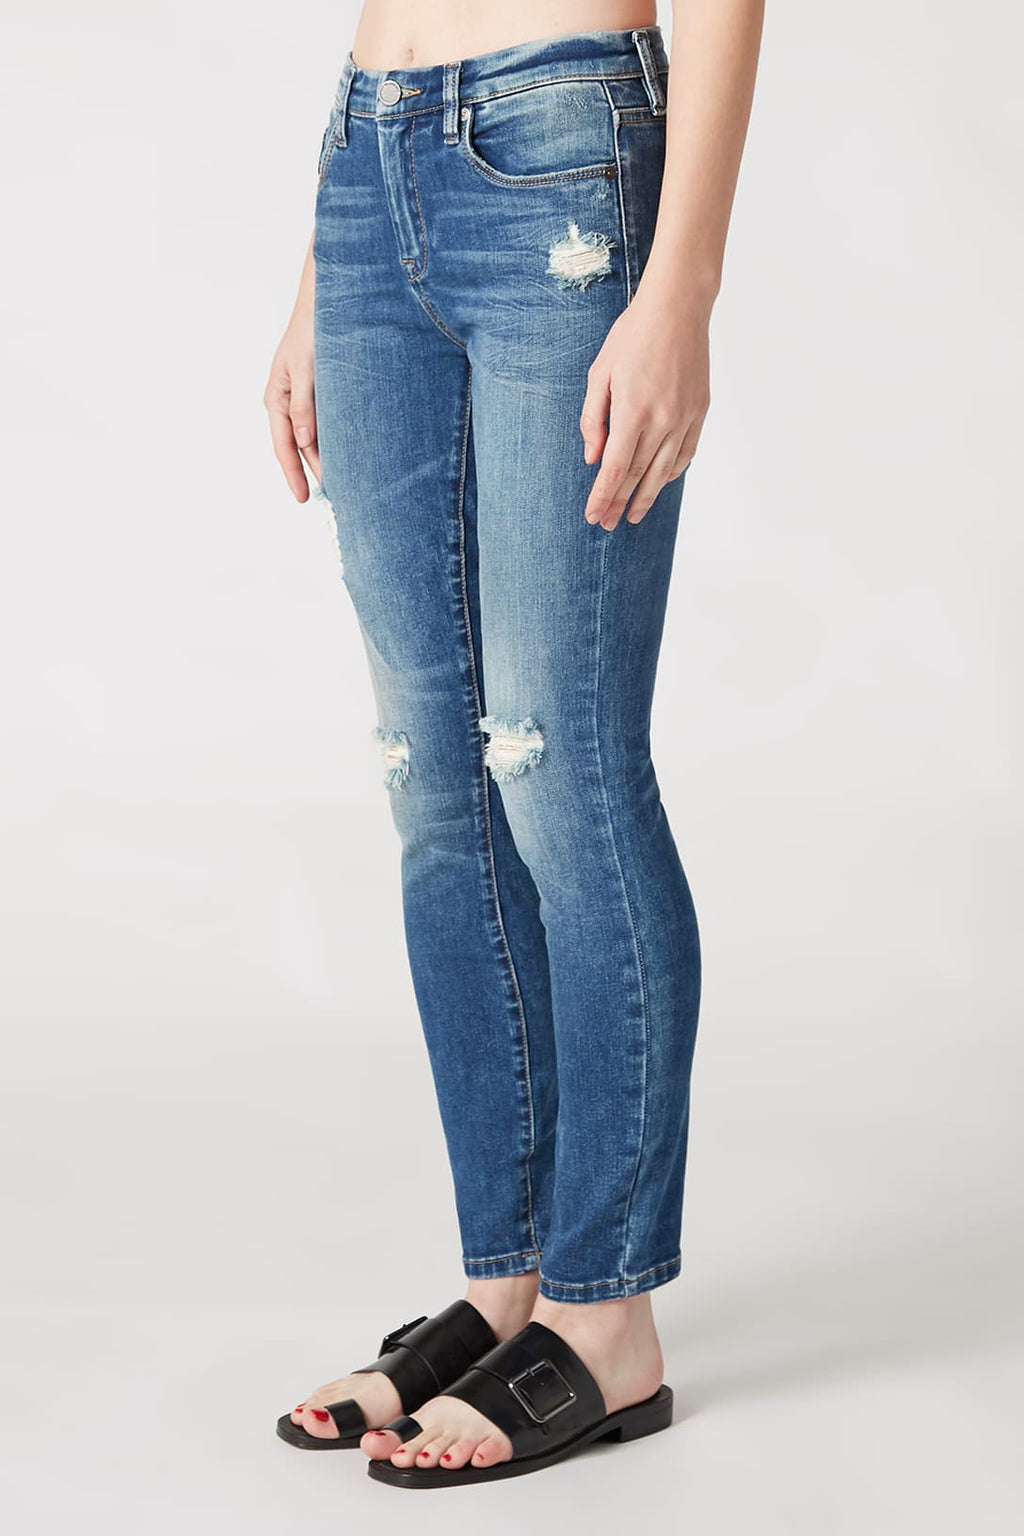 Blank NYC The Bond Beginner's Luck Jeans